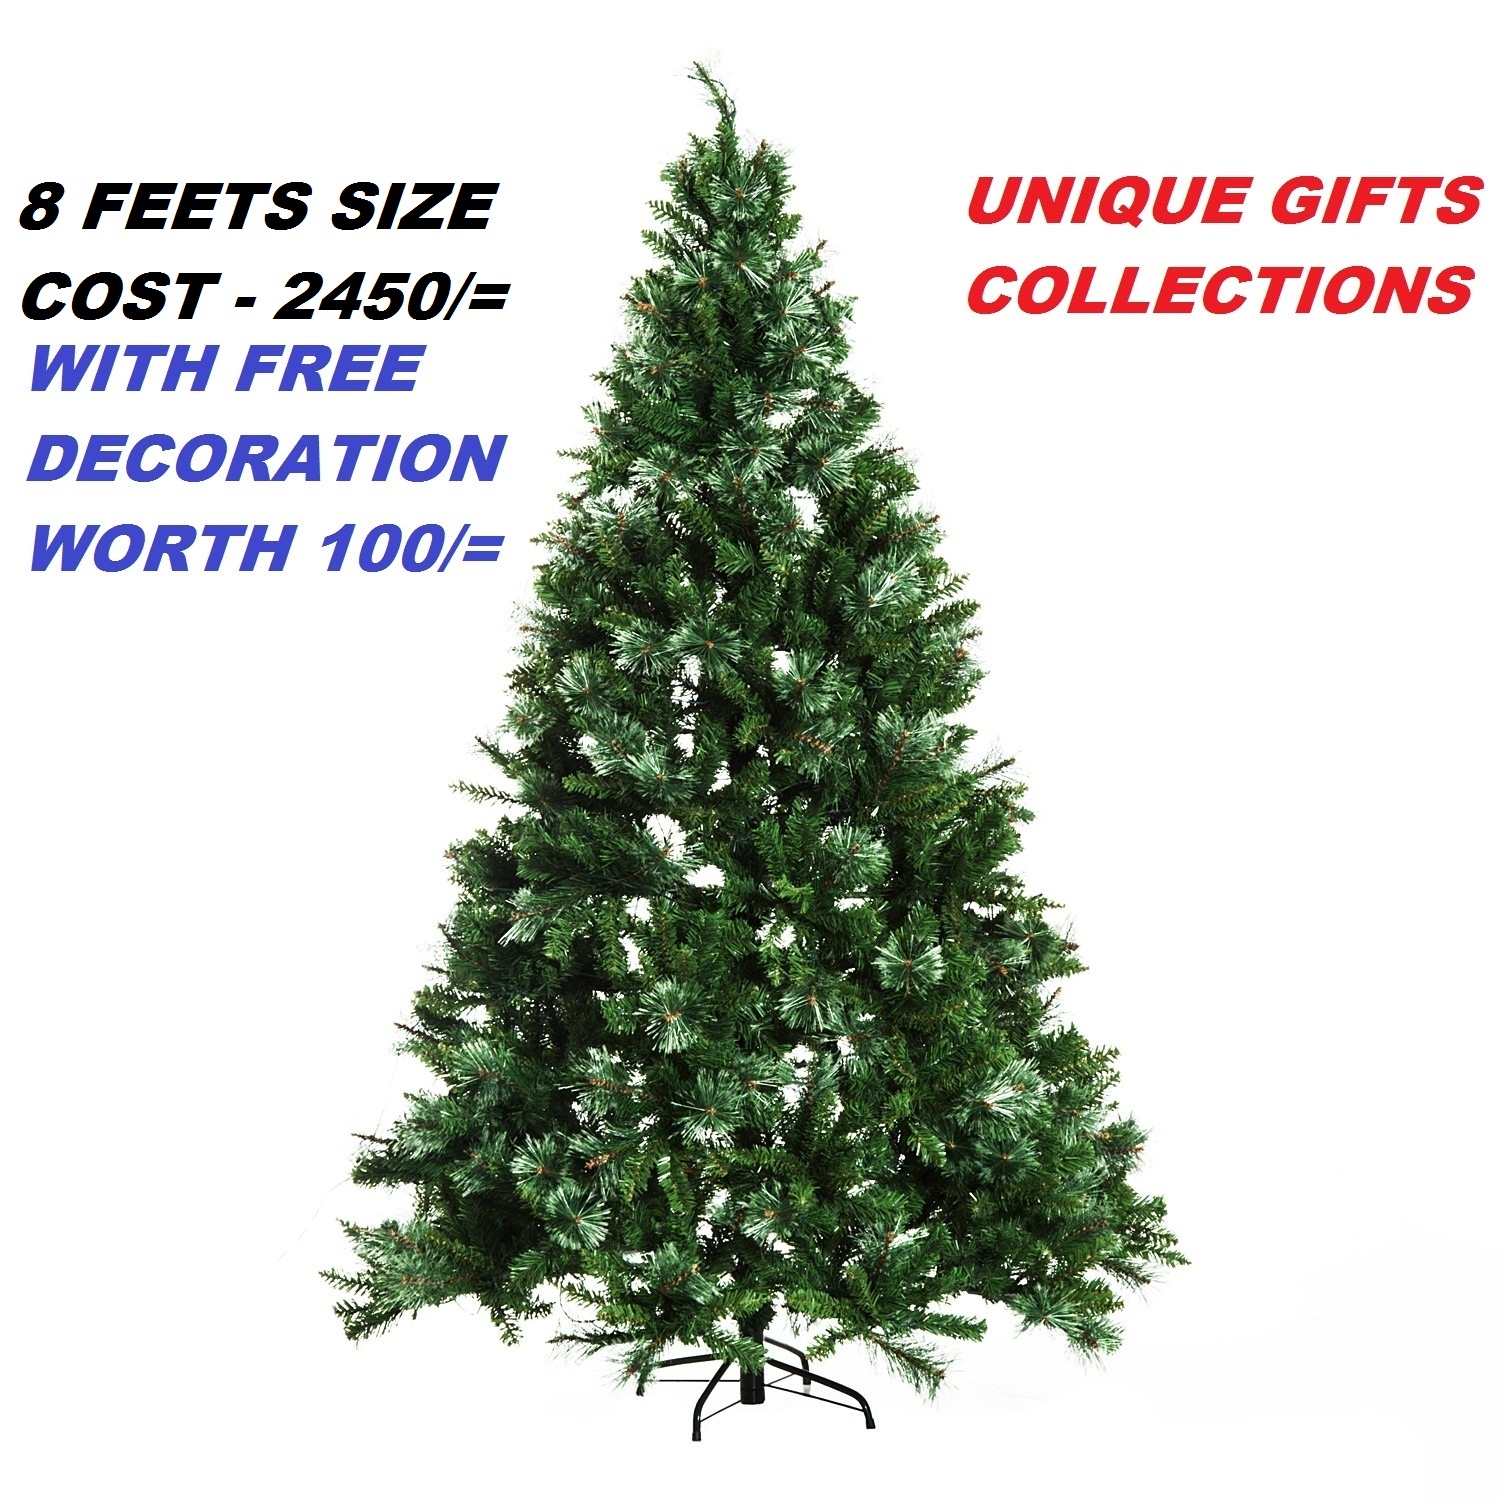 Buy UNIQUE - 8 FOOT BIG SIZE XMAS TREE - METAL STAND - 8 FEET HEIGHT ...